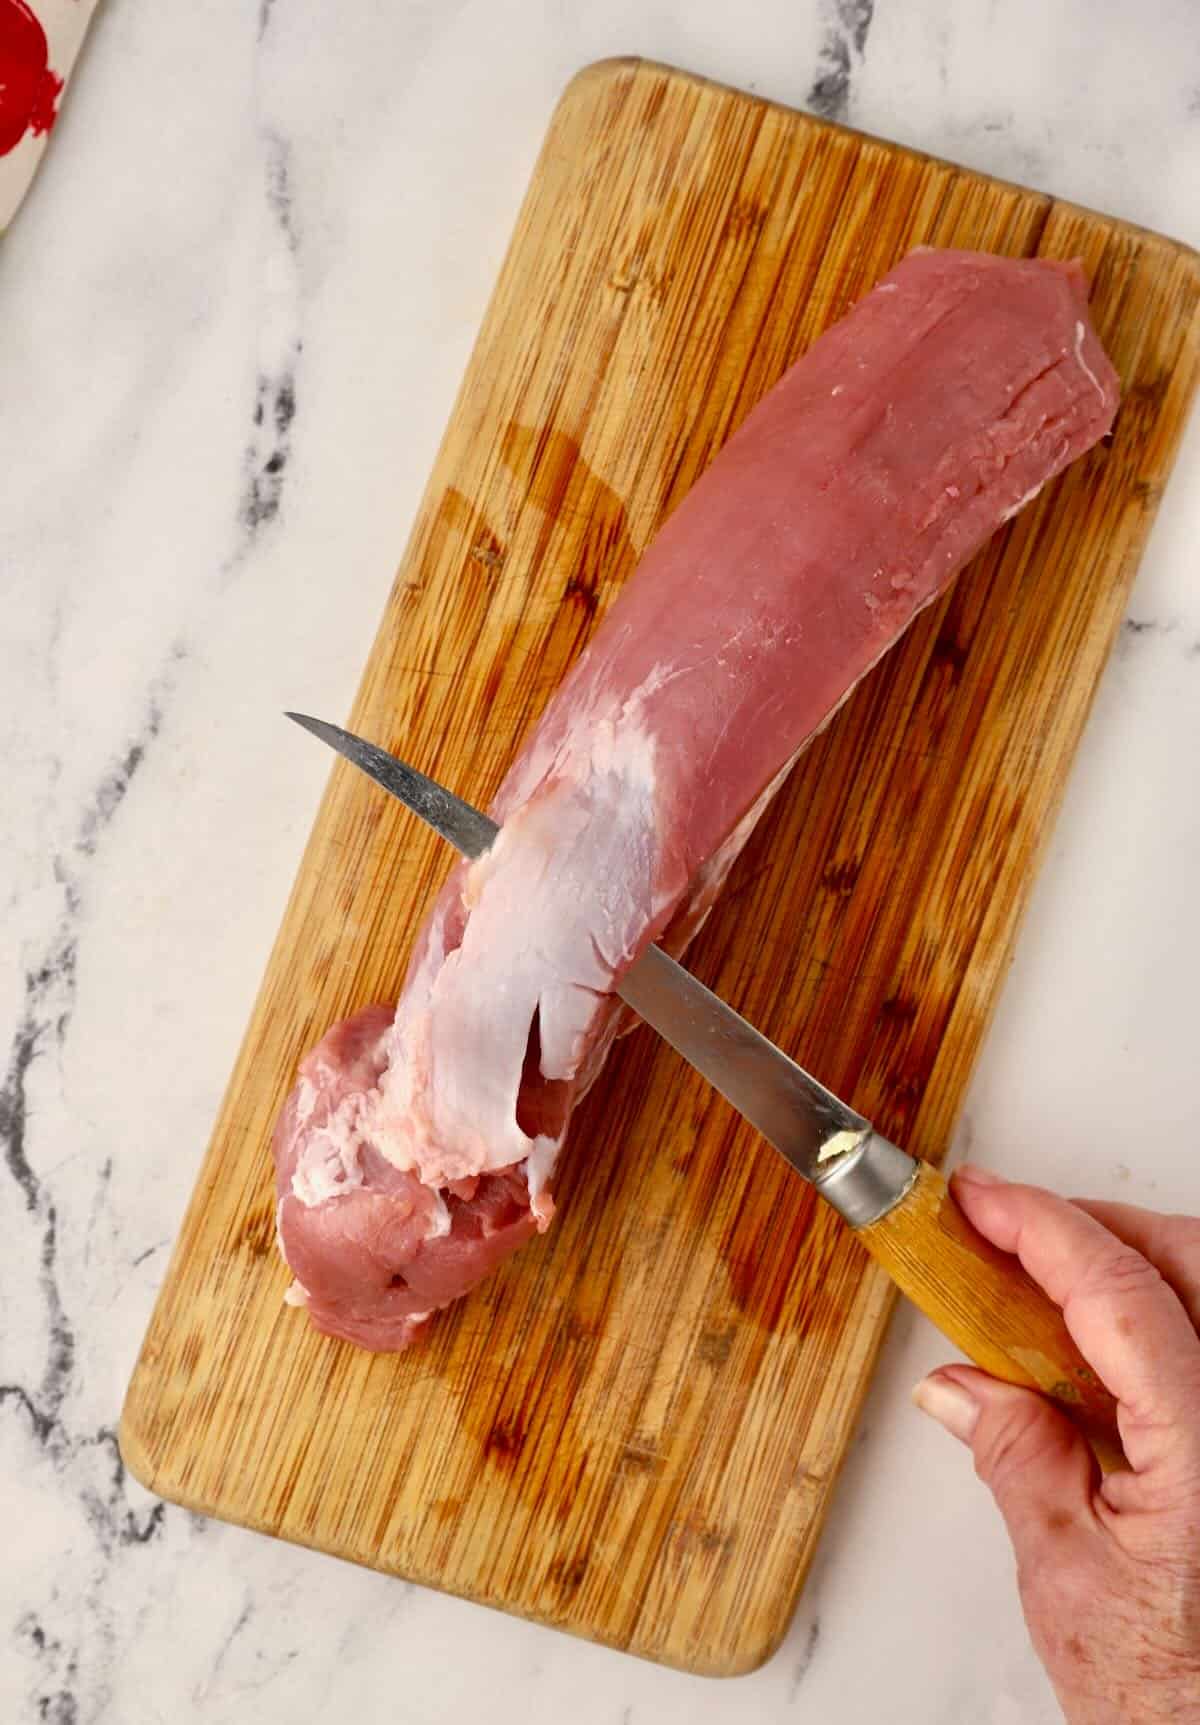 Removing silver skin with a knife on a pork tenderloin. 